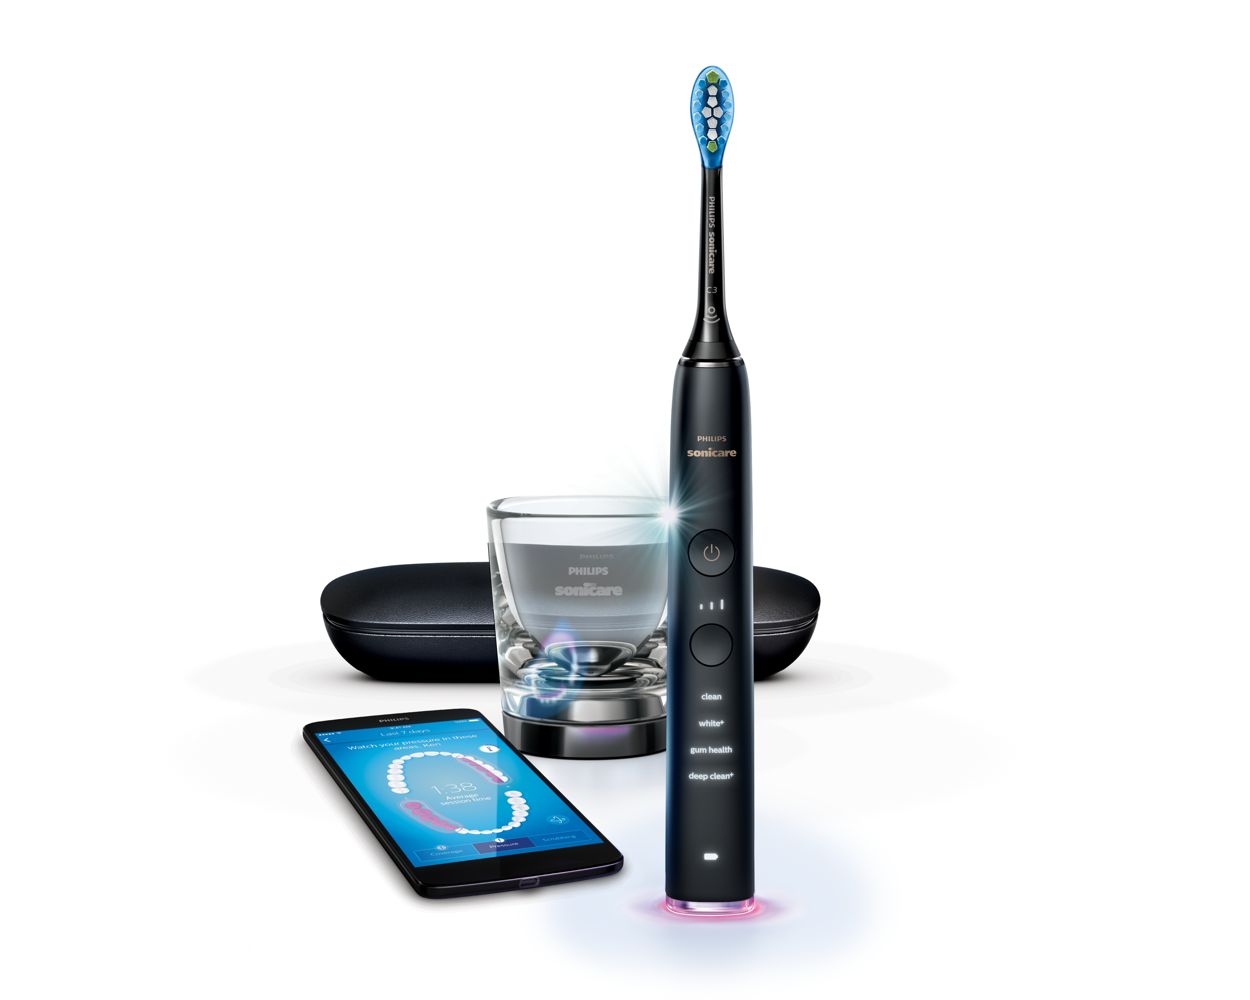 DiamondClean Smart Sonic electric toothbrush with app HX9903/19